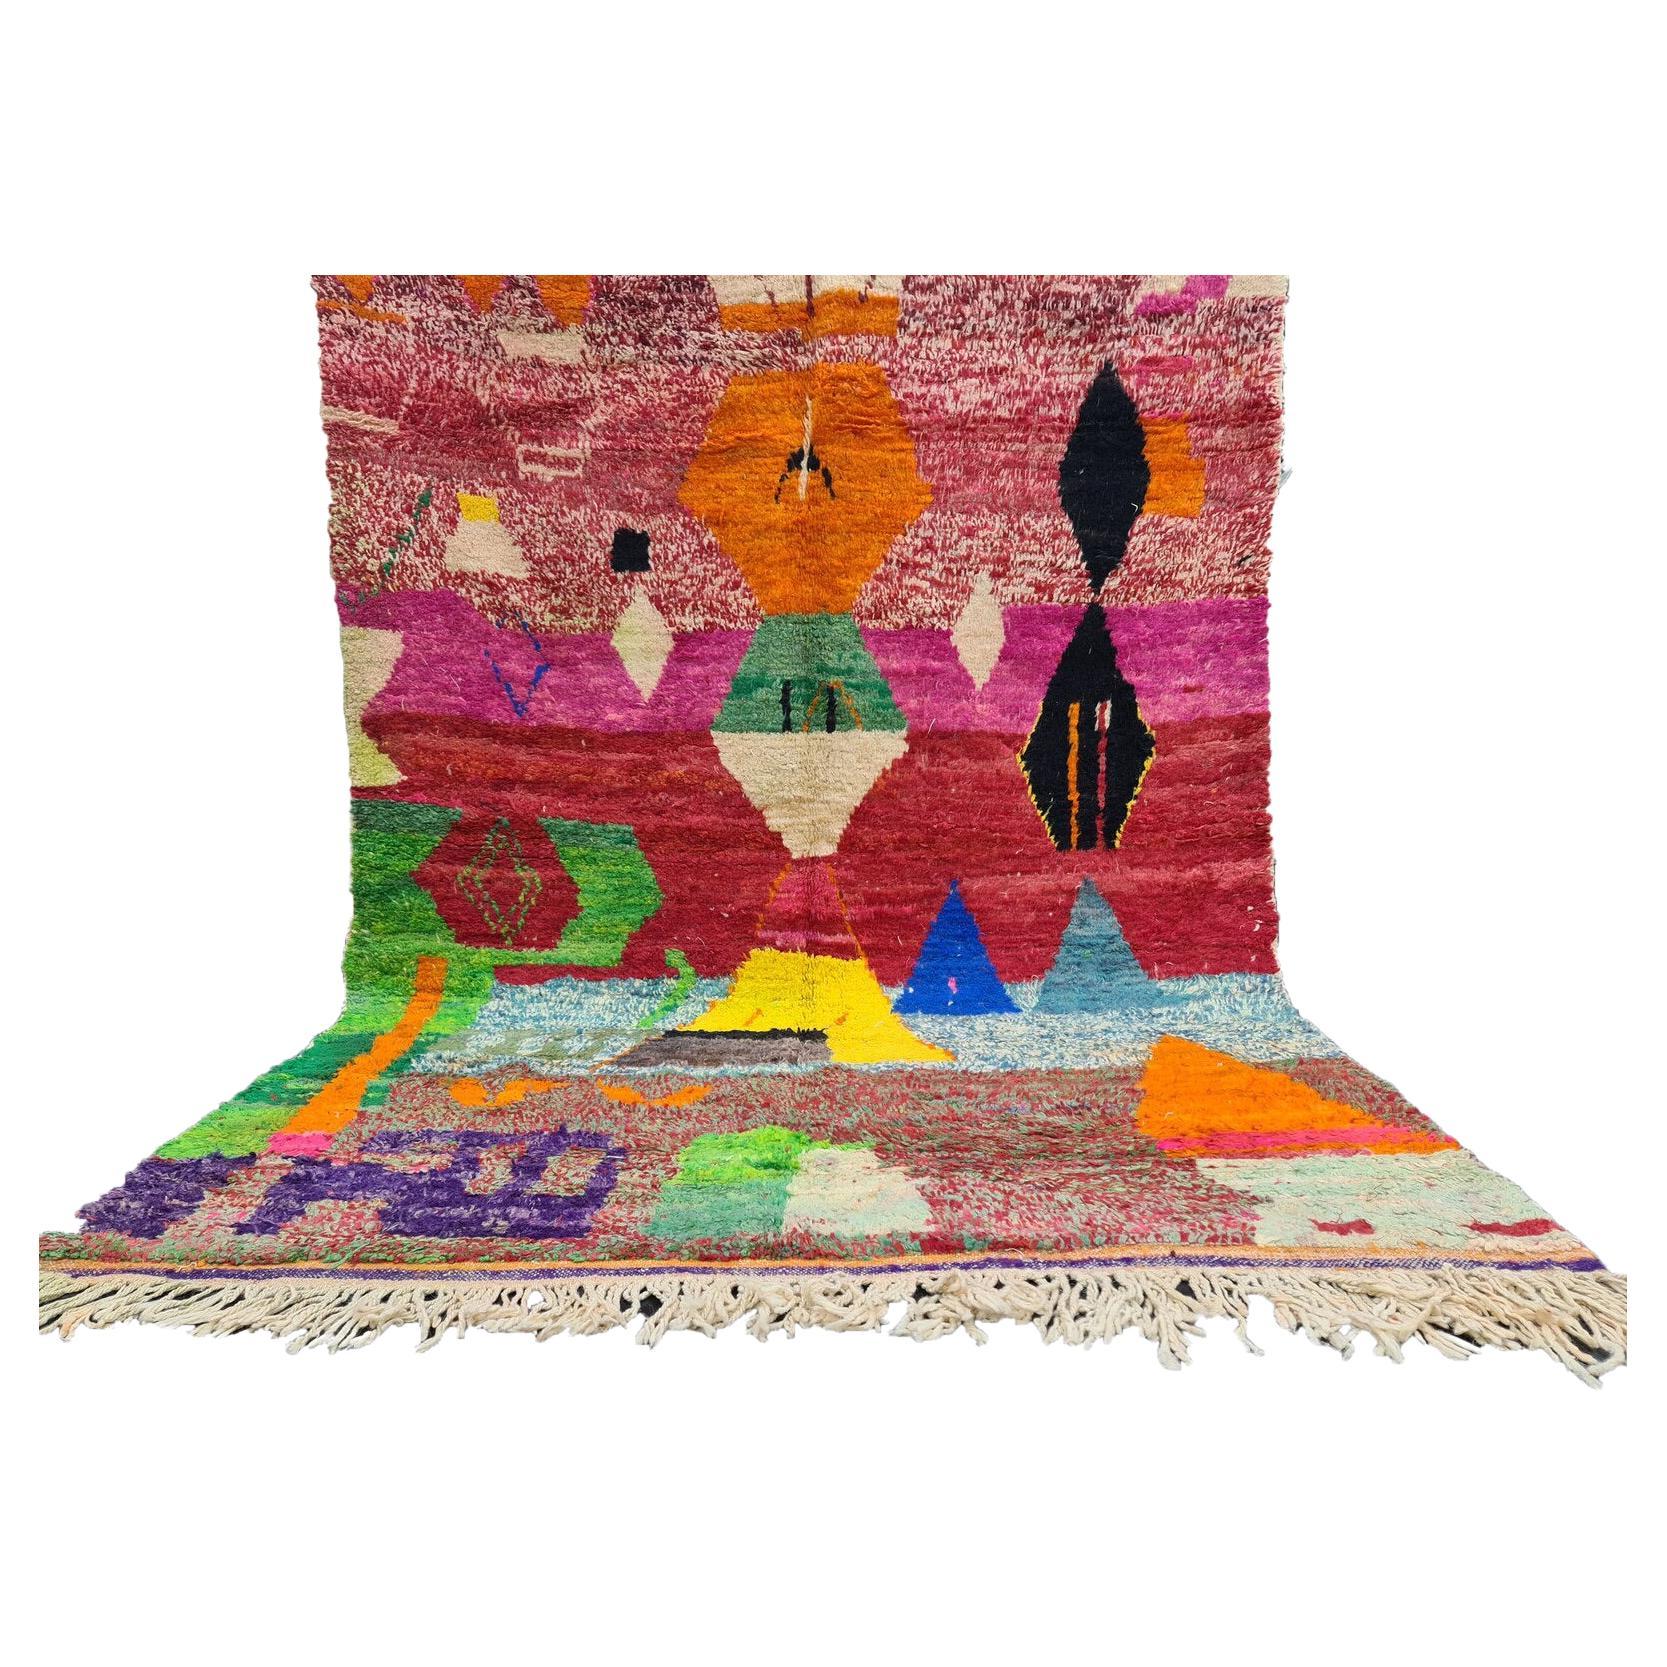 Moroccan Boujaad rug handwoven out of natural and soft sheep wool featuring bright red, pinks, mauve, orange, red, blue, and green along with irregular geometric patterns blending Arabic and Berber cultures in Morocco. The colors are made from the